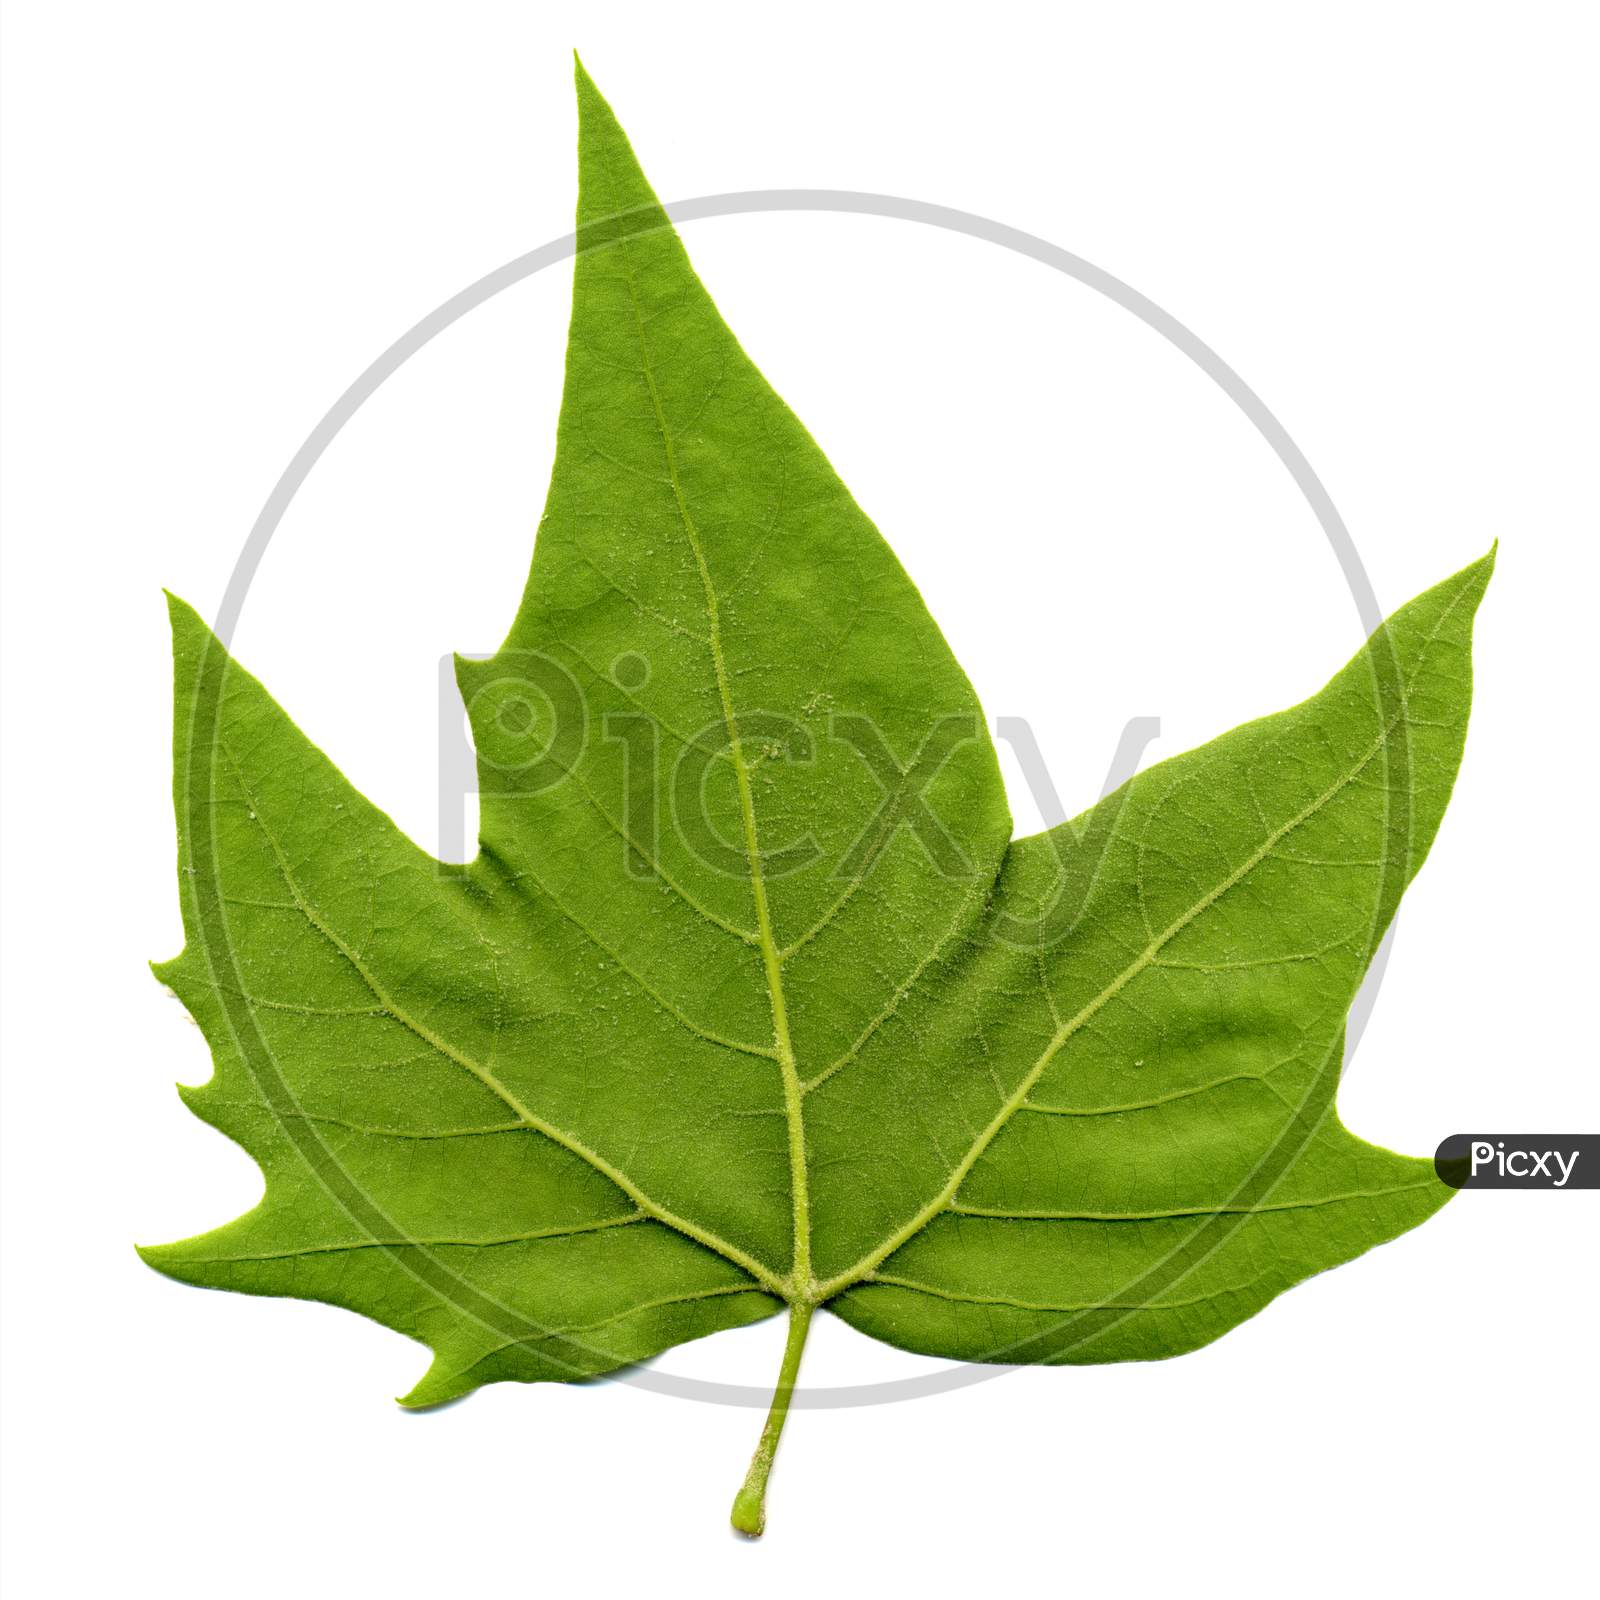 Rear Side Of Plane (Platanus) Tree Leaf Isolated Over White